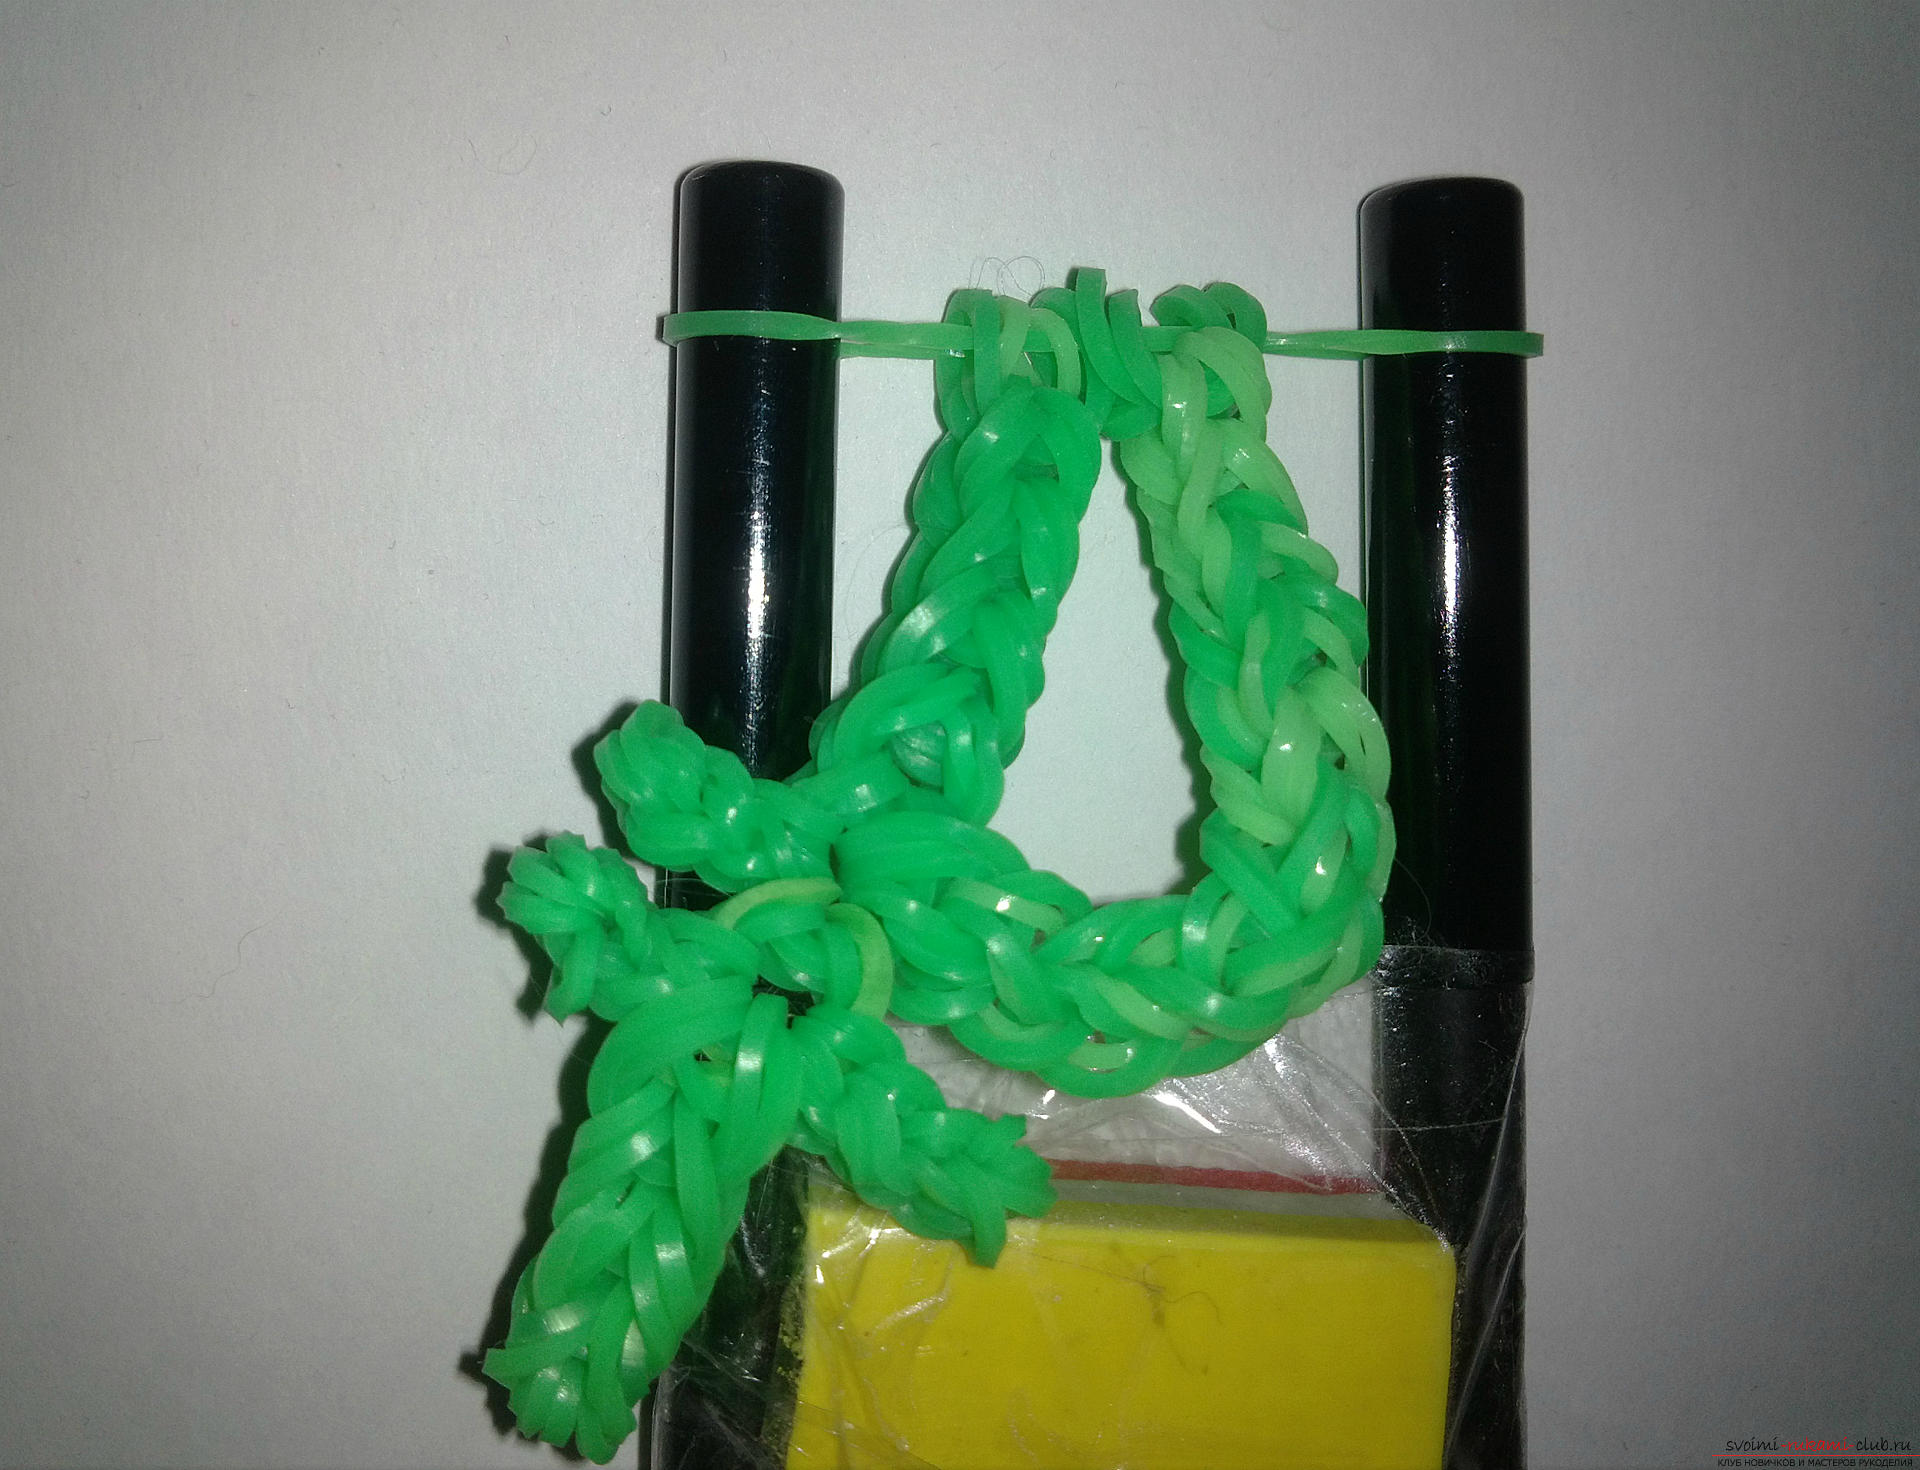 Master-class will teach you how to make your own handiwork of rubber bands - key chain 